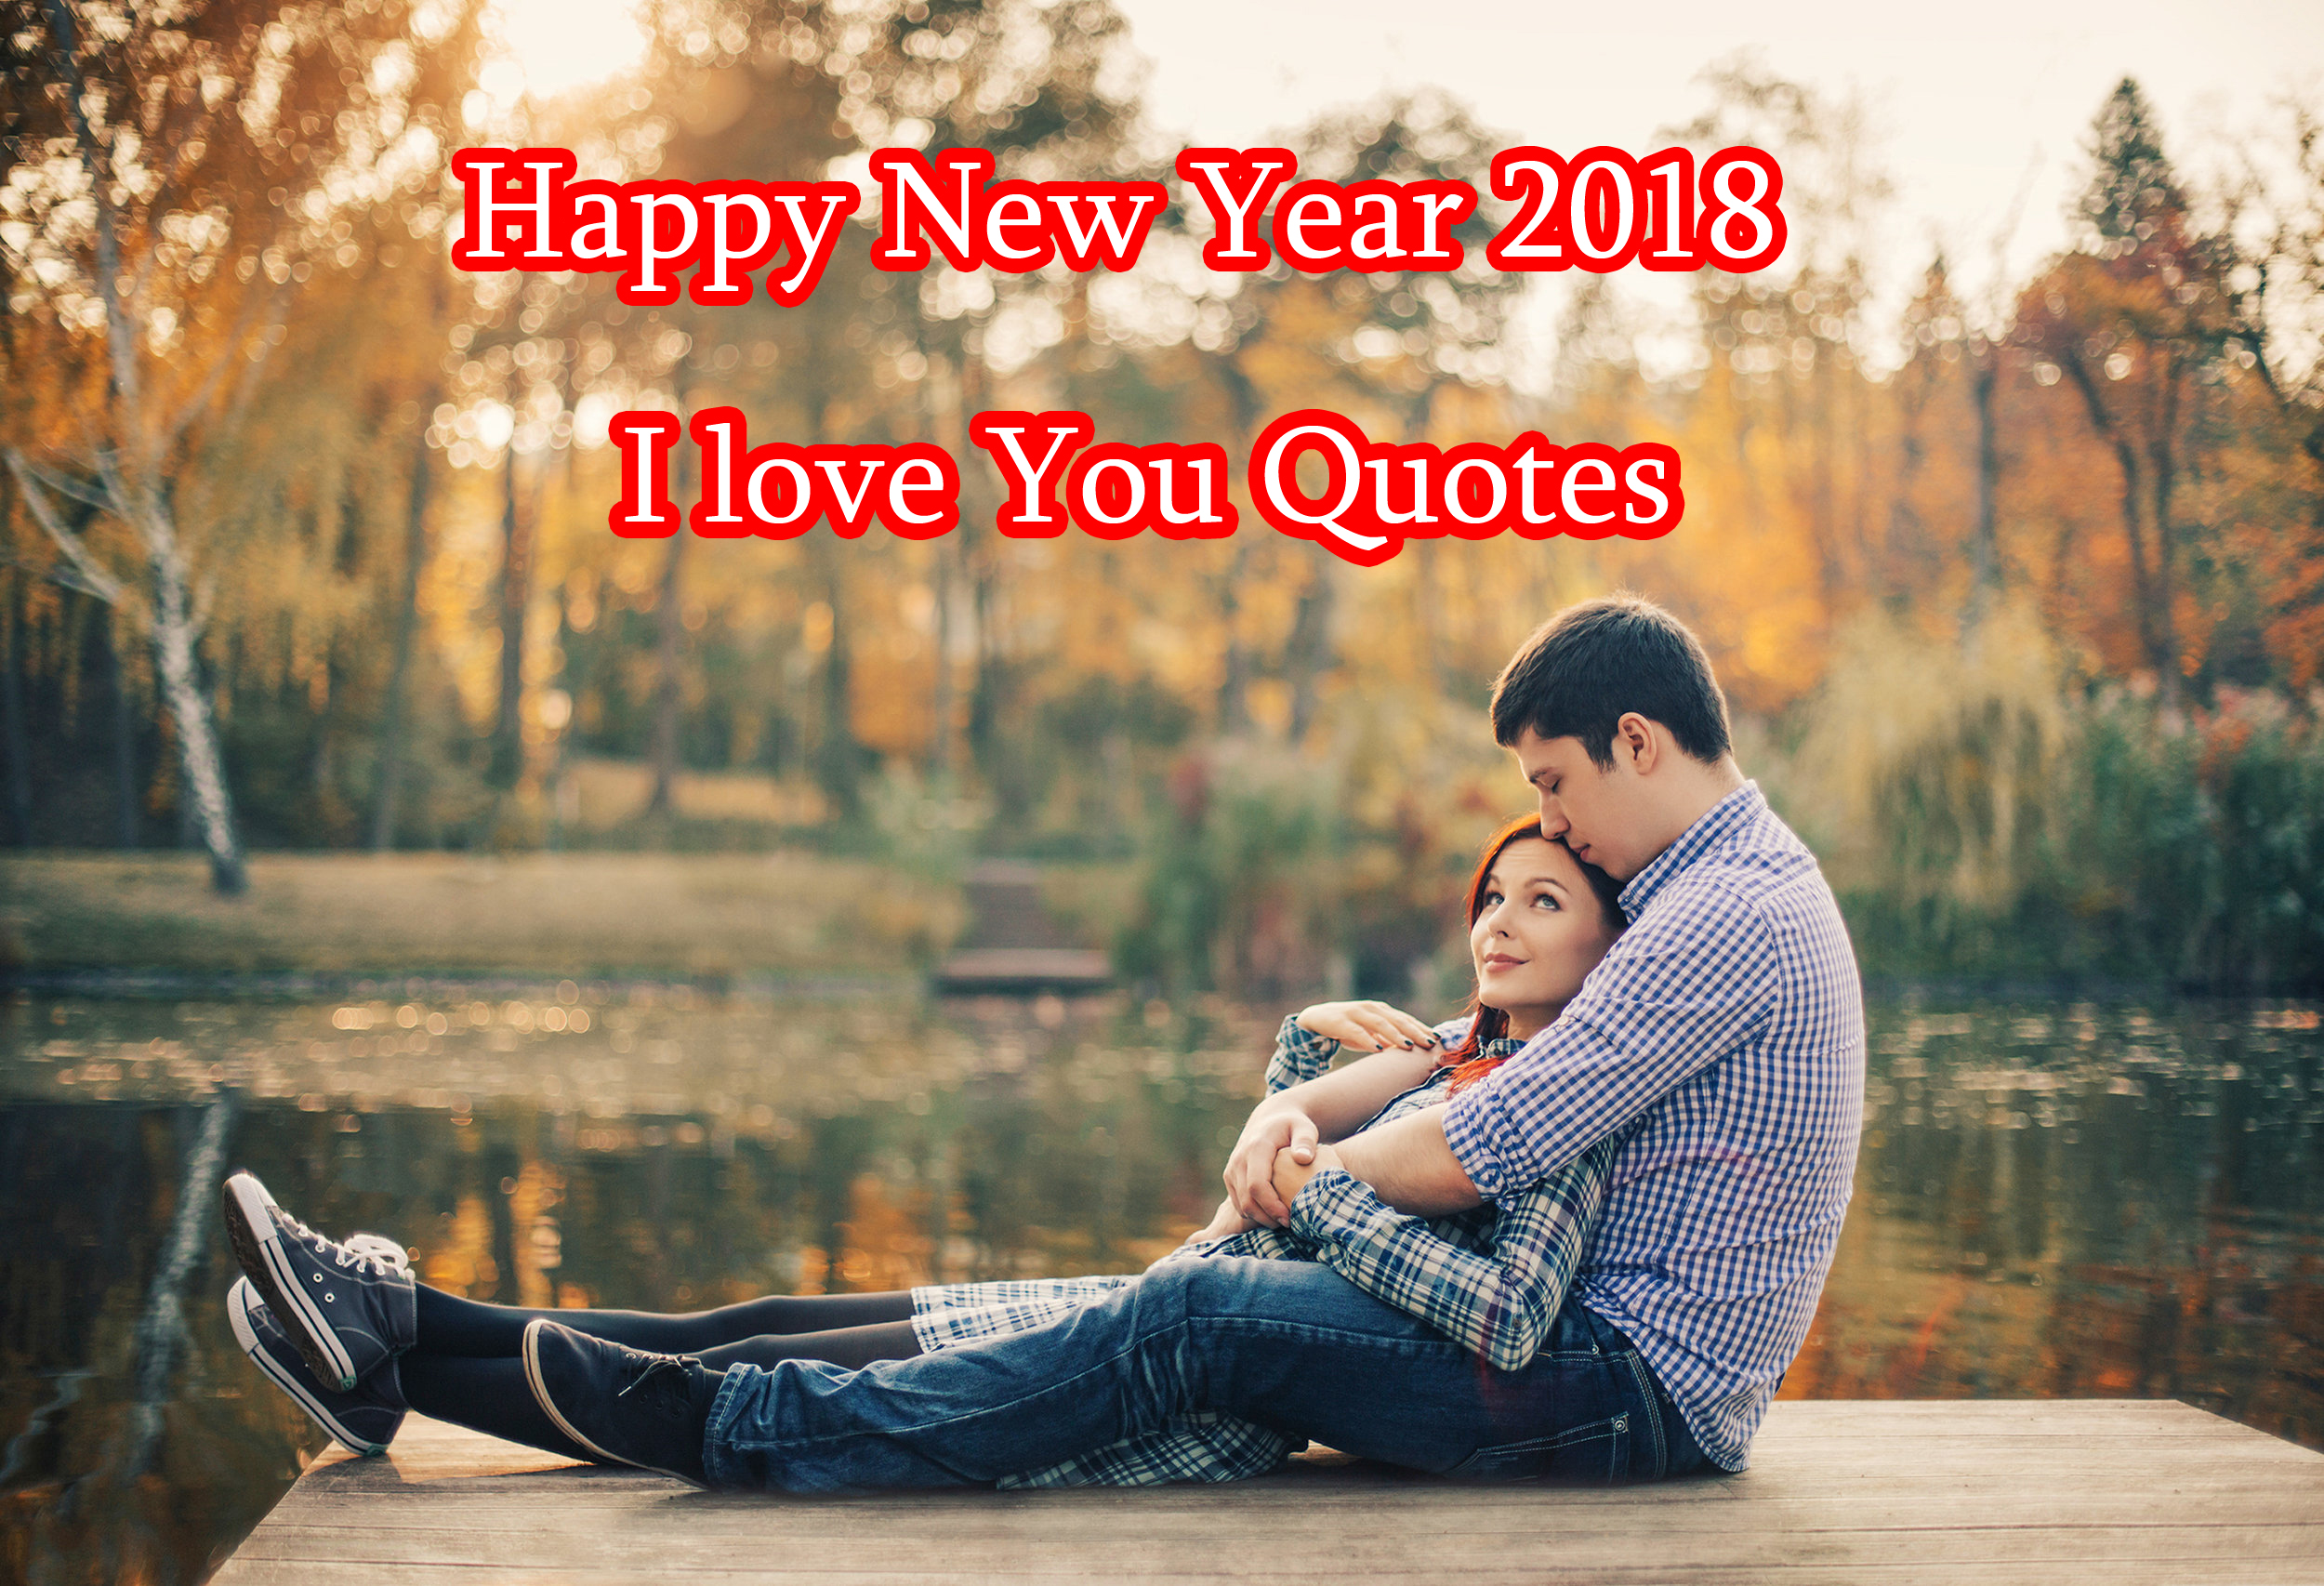 Happy New Year I Love You Quotes Image For